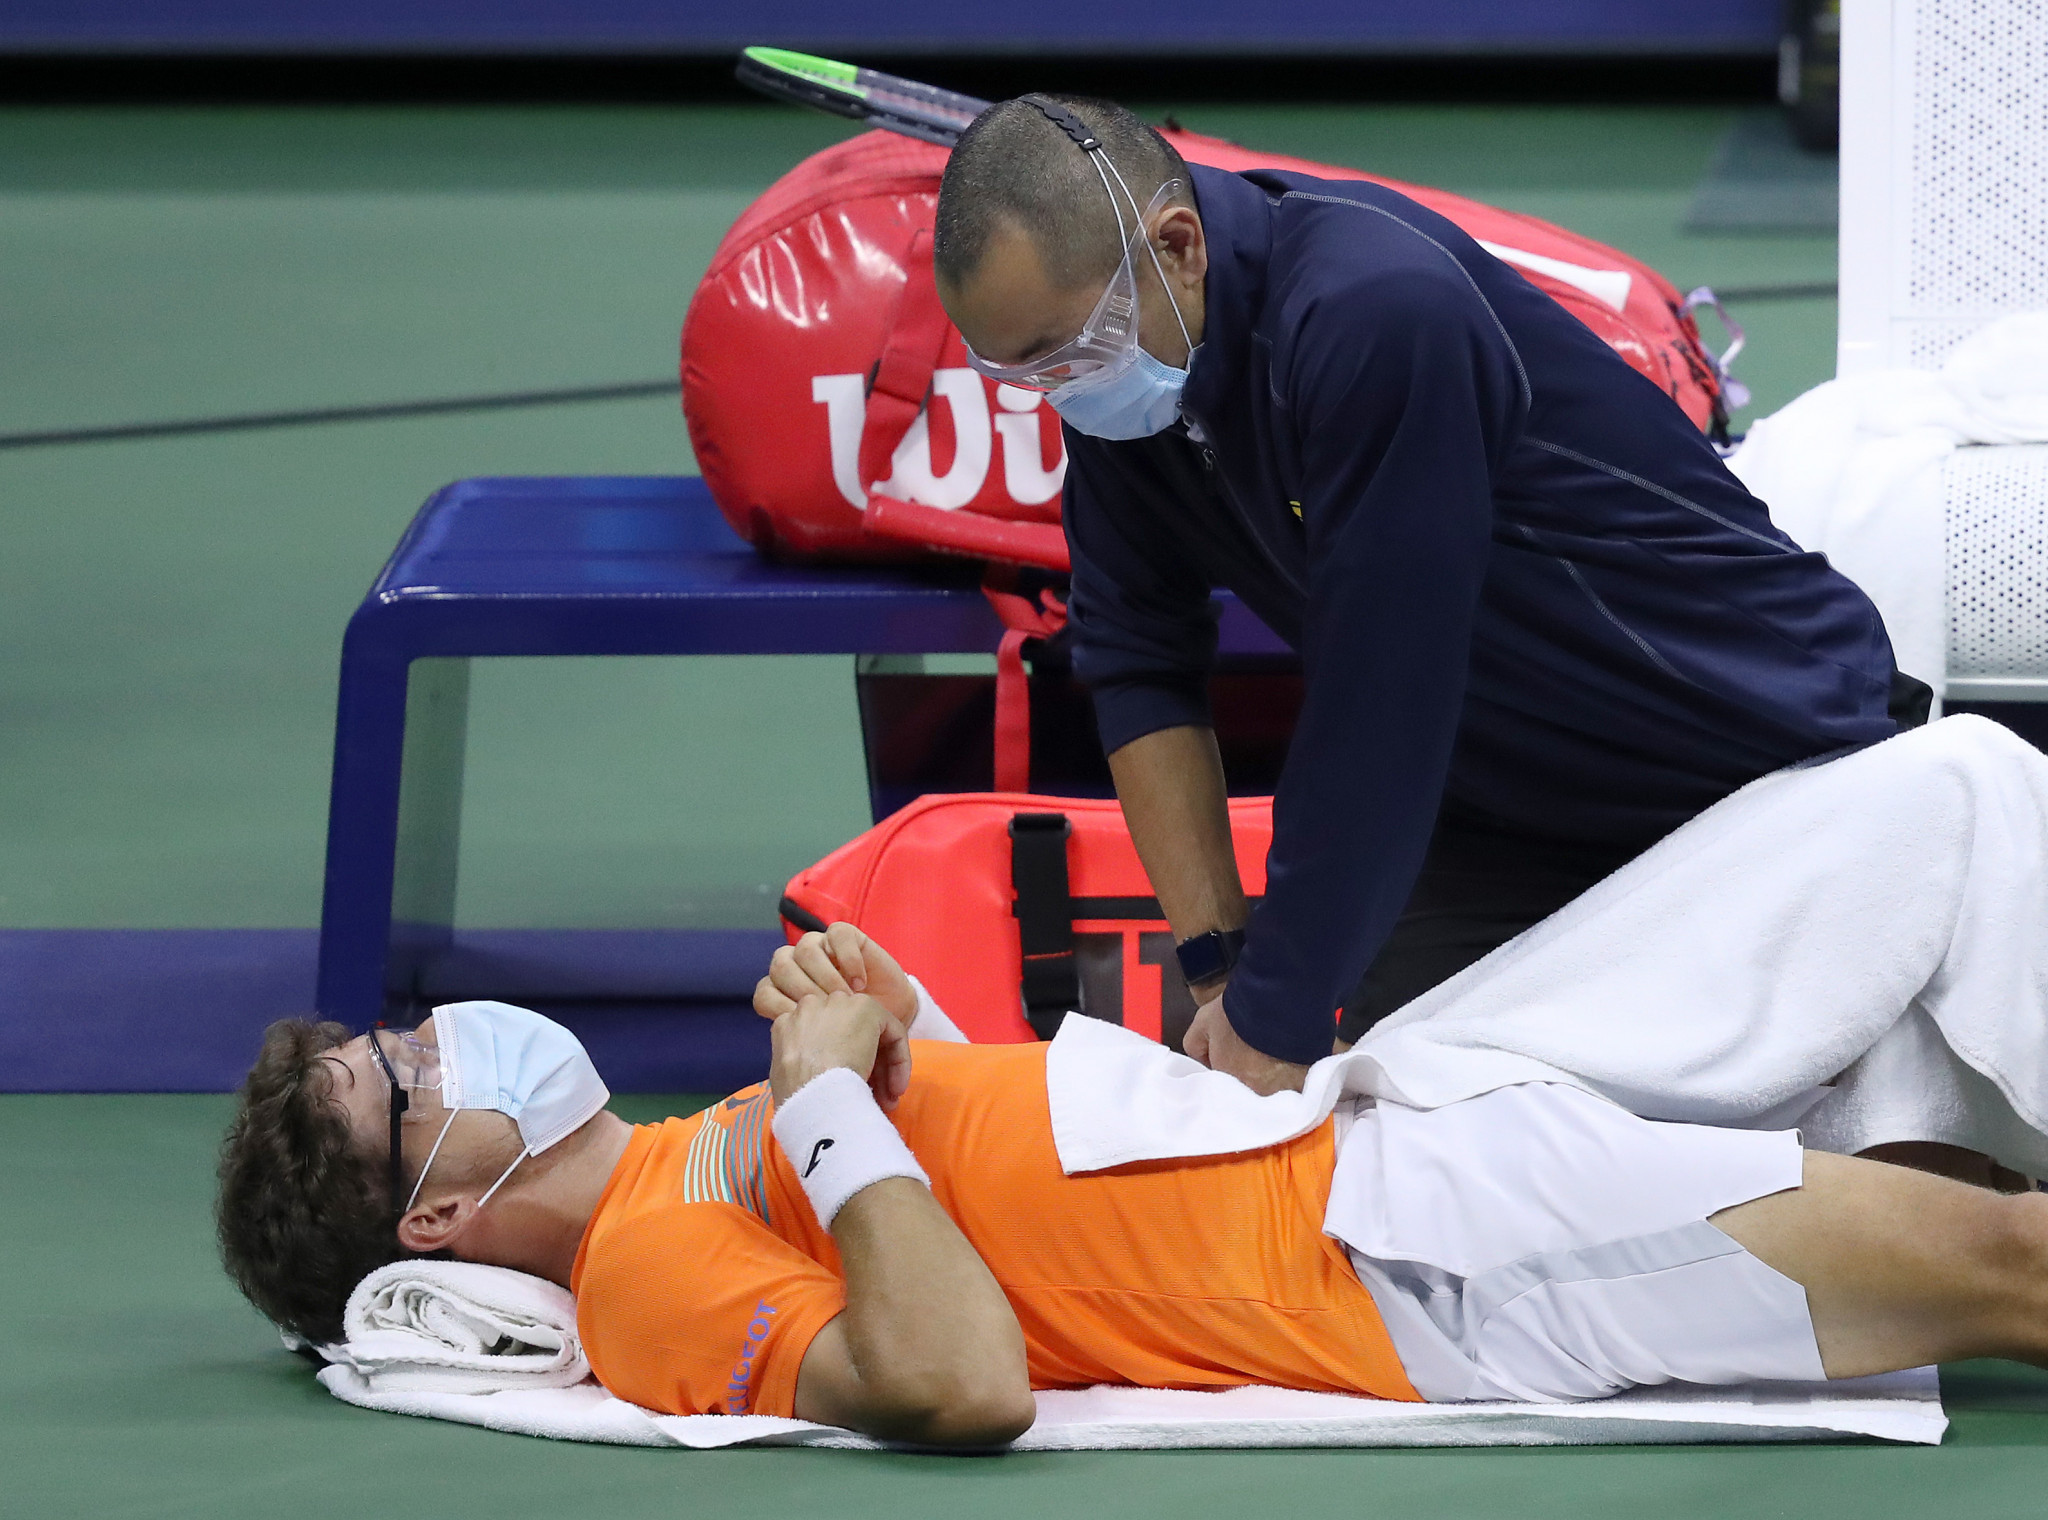 Pablo Carreno-Busta received treatment from the trainer as he lost his semi-final to Alex Zverev ©Getty Images